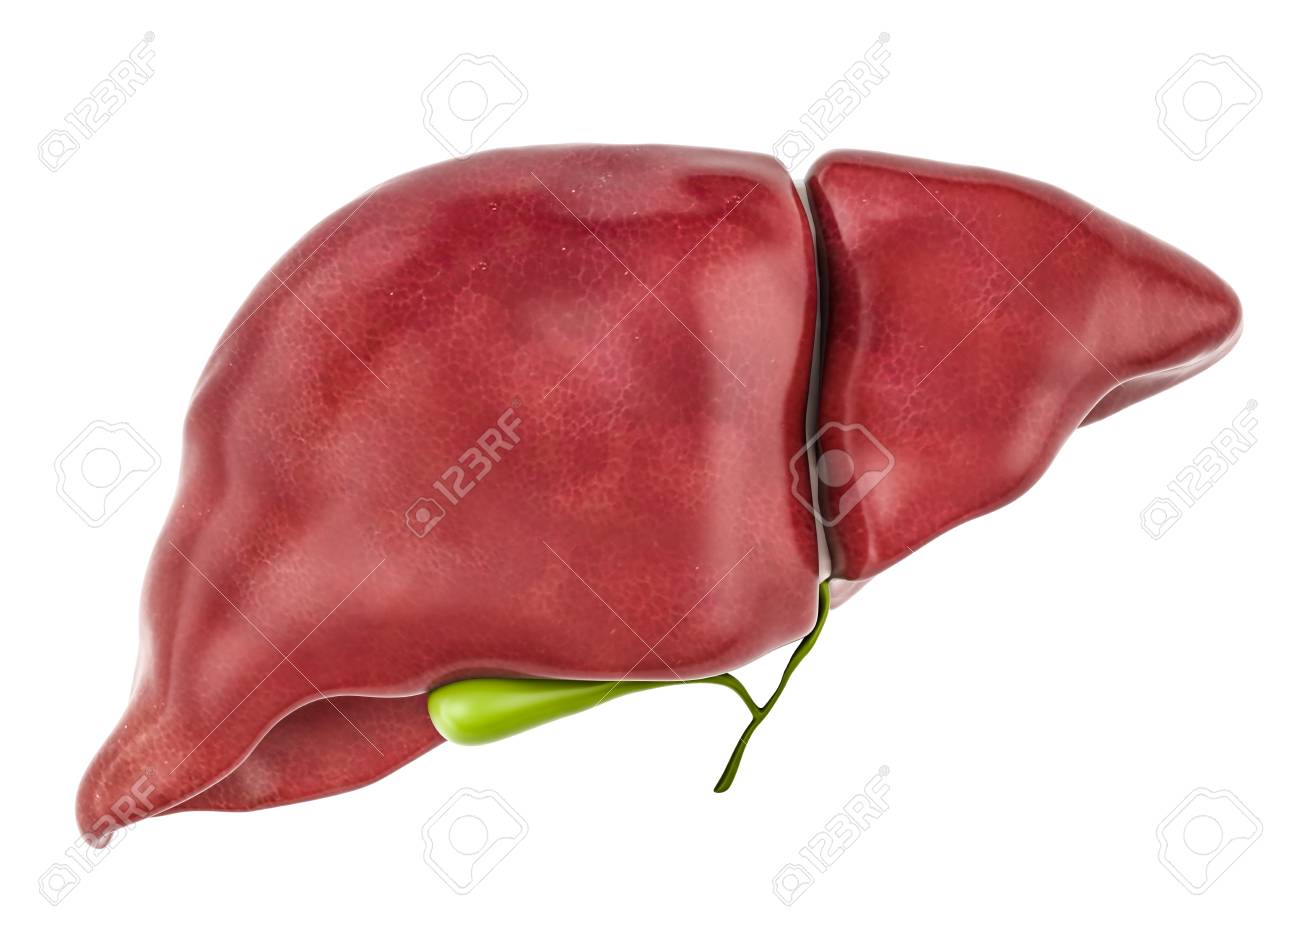 Healthy Human Liver With Gallbladder 3d Rendering Isolated On